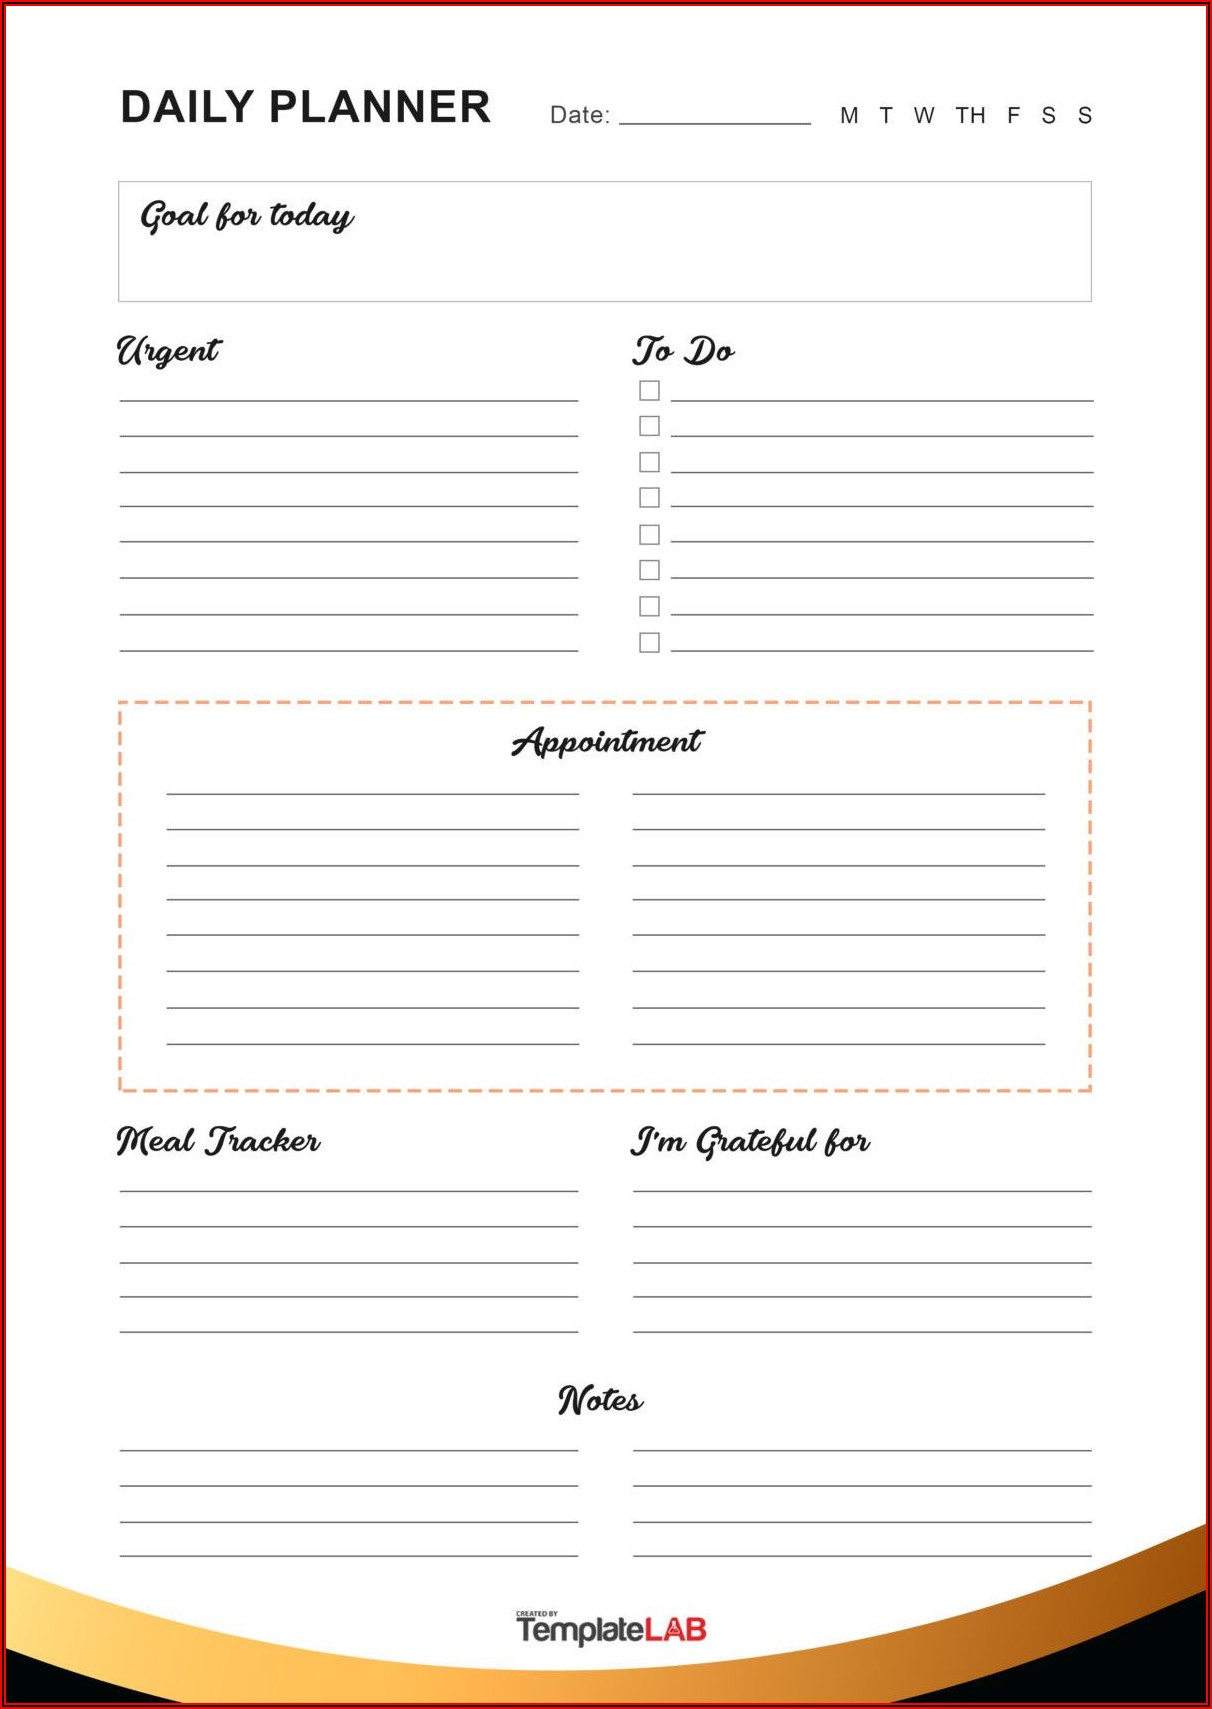 Sales Daily Planner Template